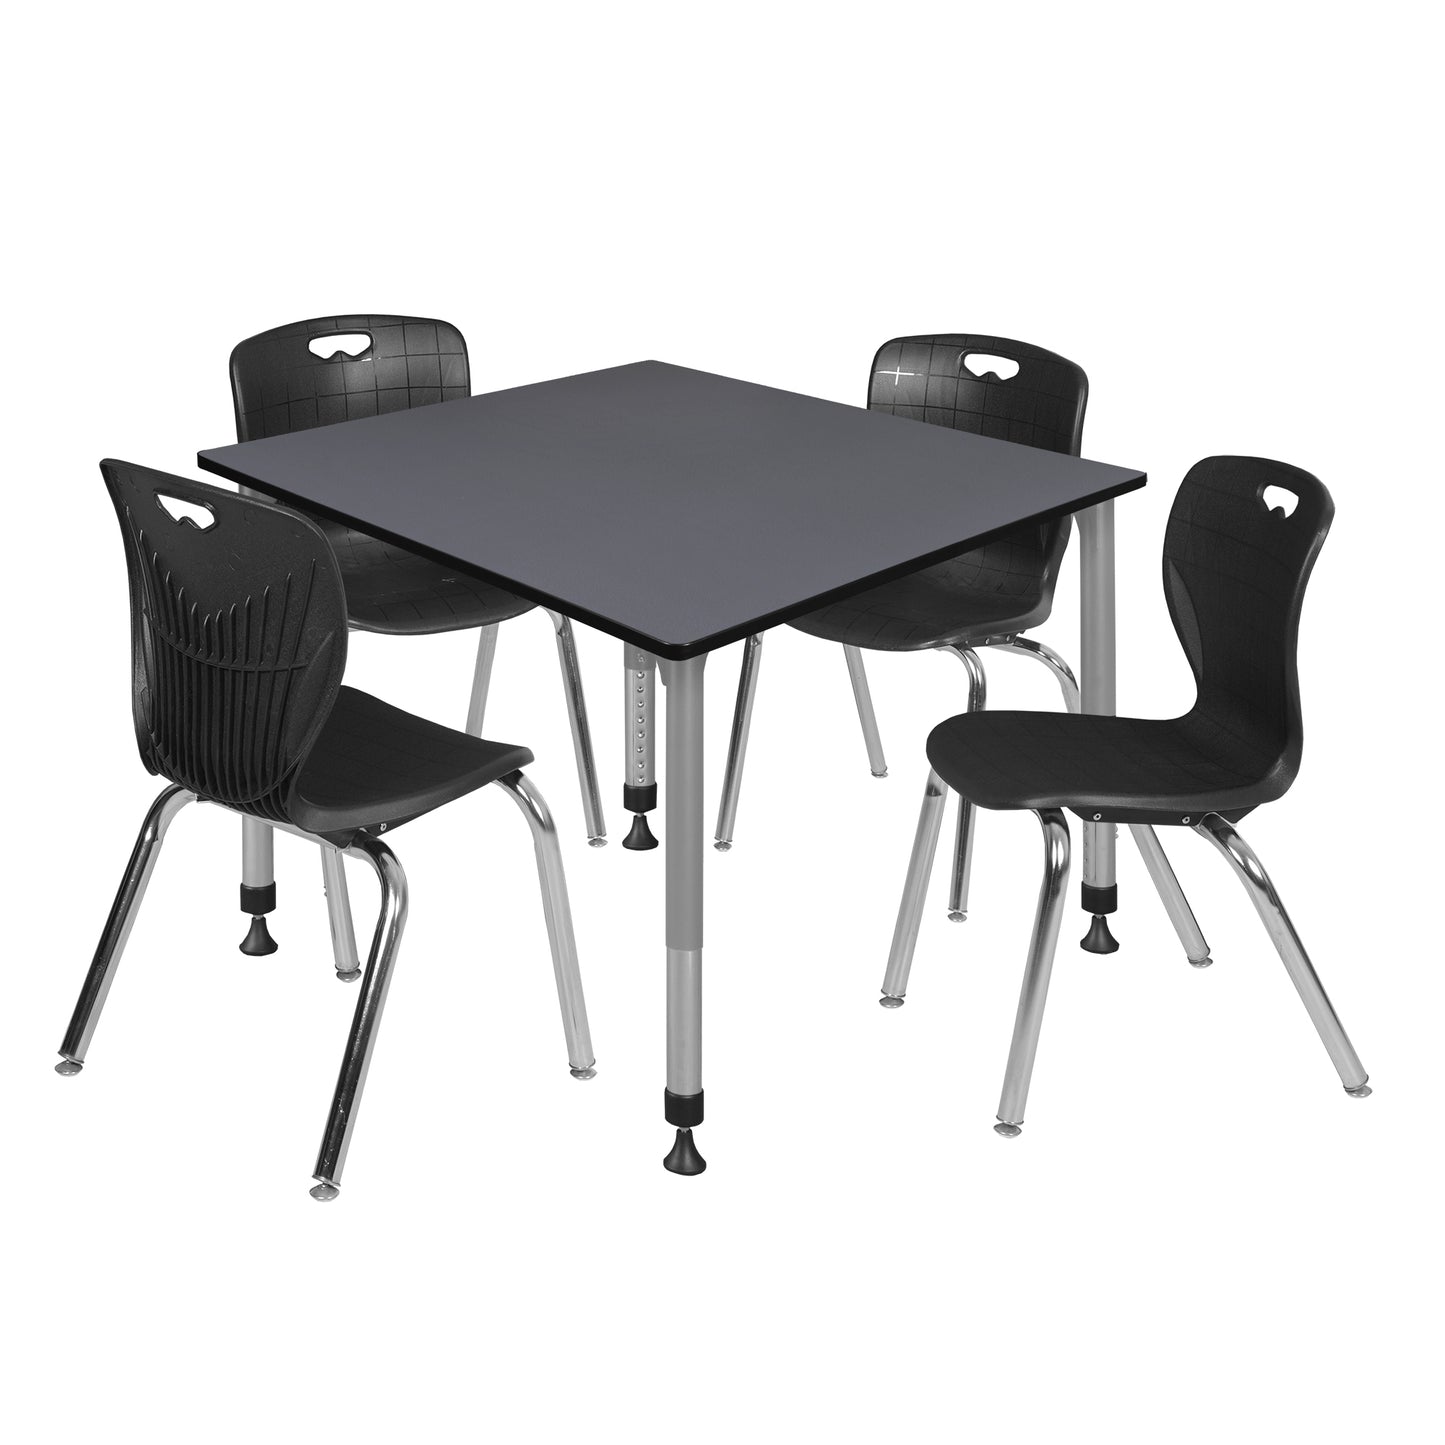 Regency Kee 48 in. Square Adjustable Classroom Table & 4 Andy 18 in. Stack Chairs